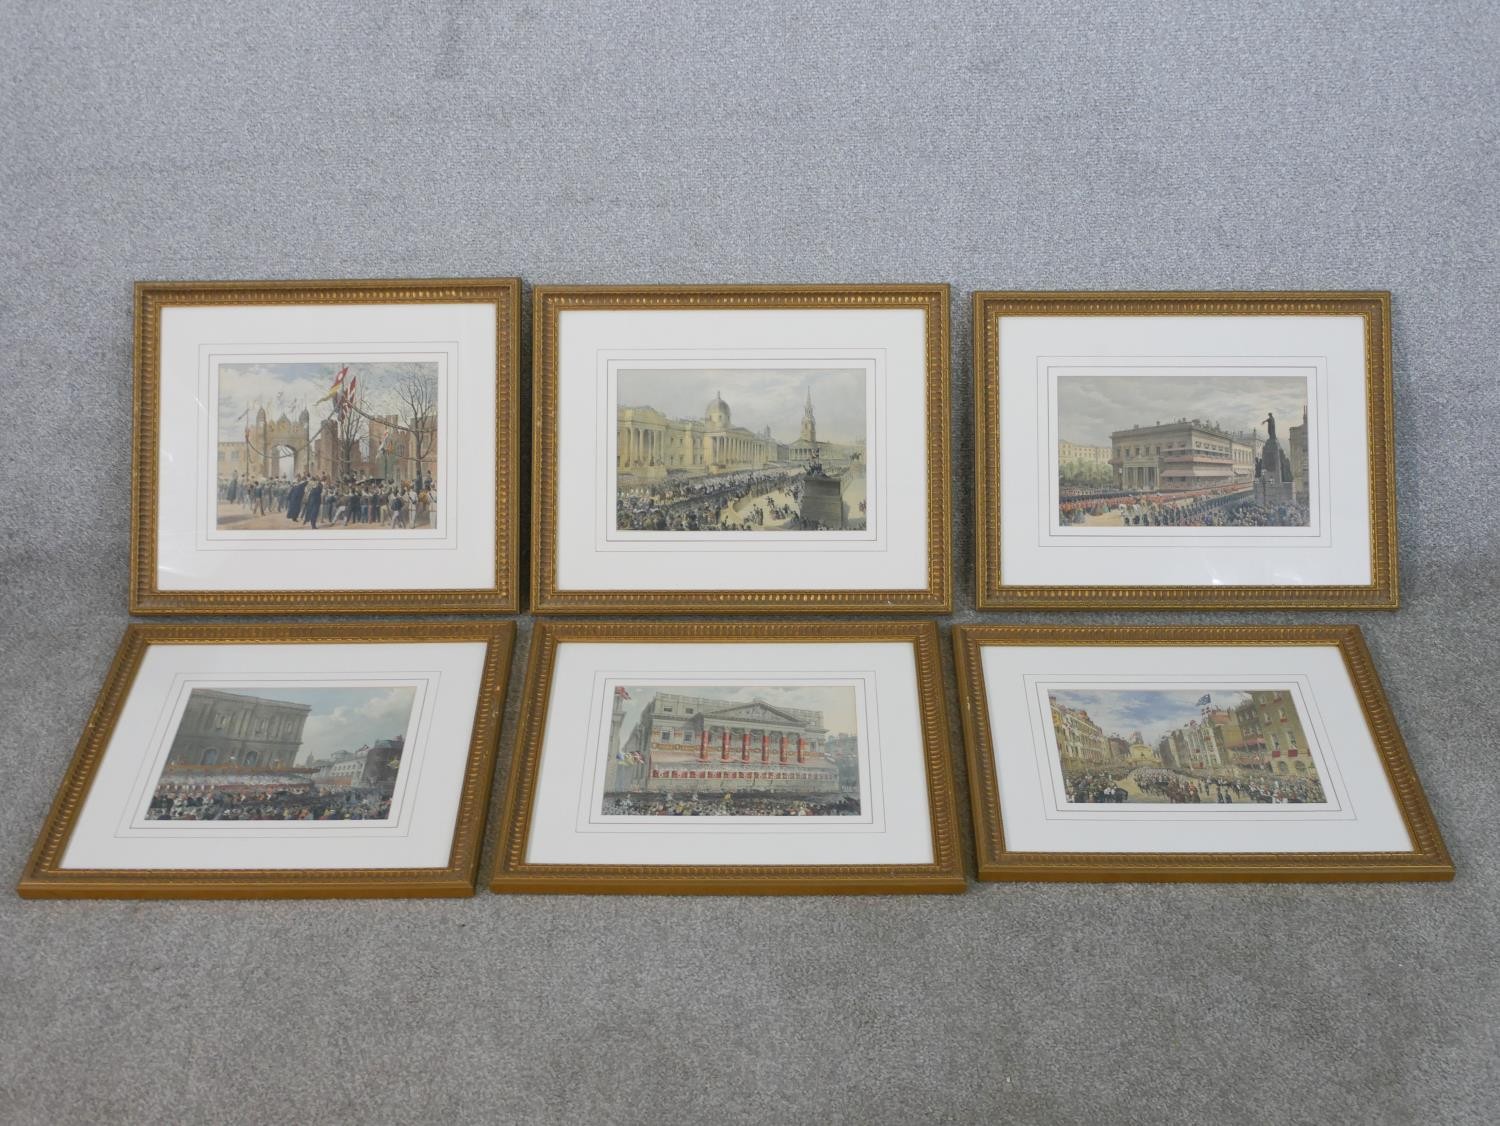 Six framed and glazed 19th century hand coloured engravings of English landmark buildings,